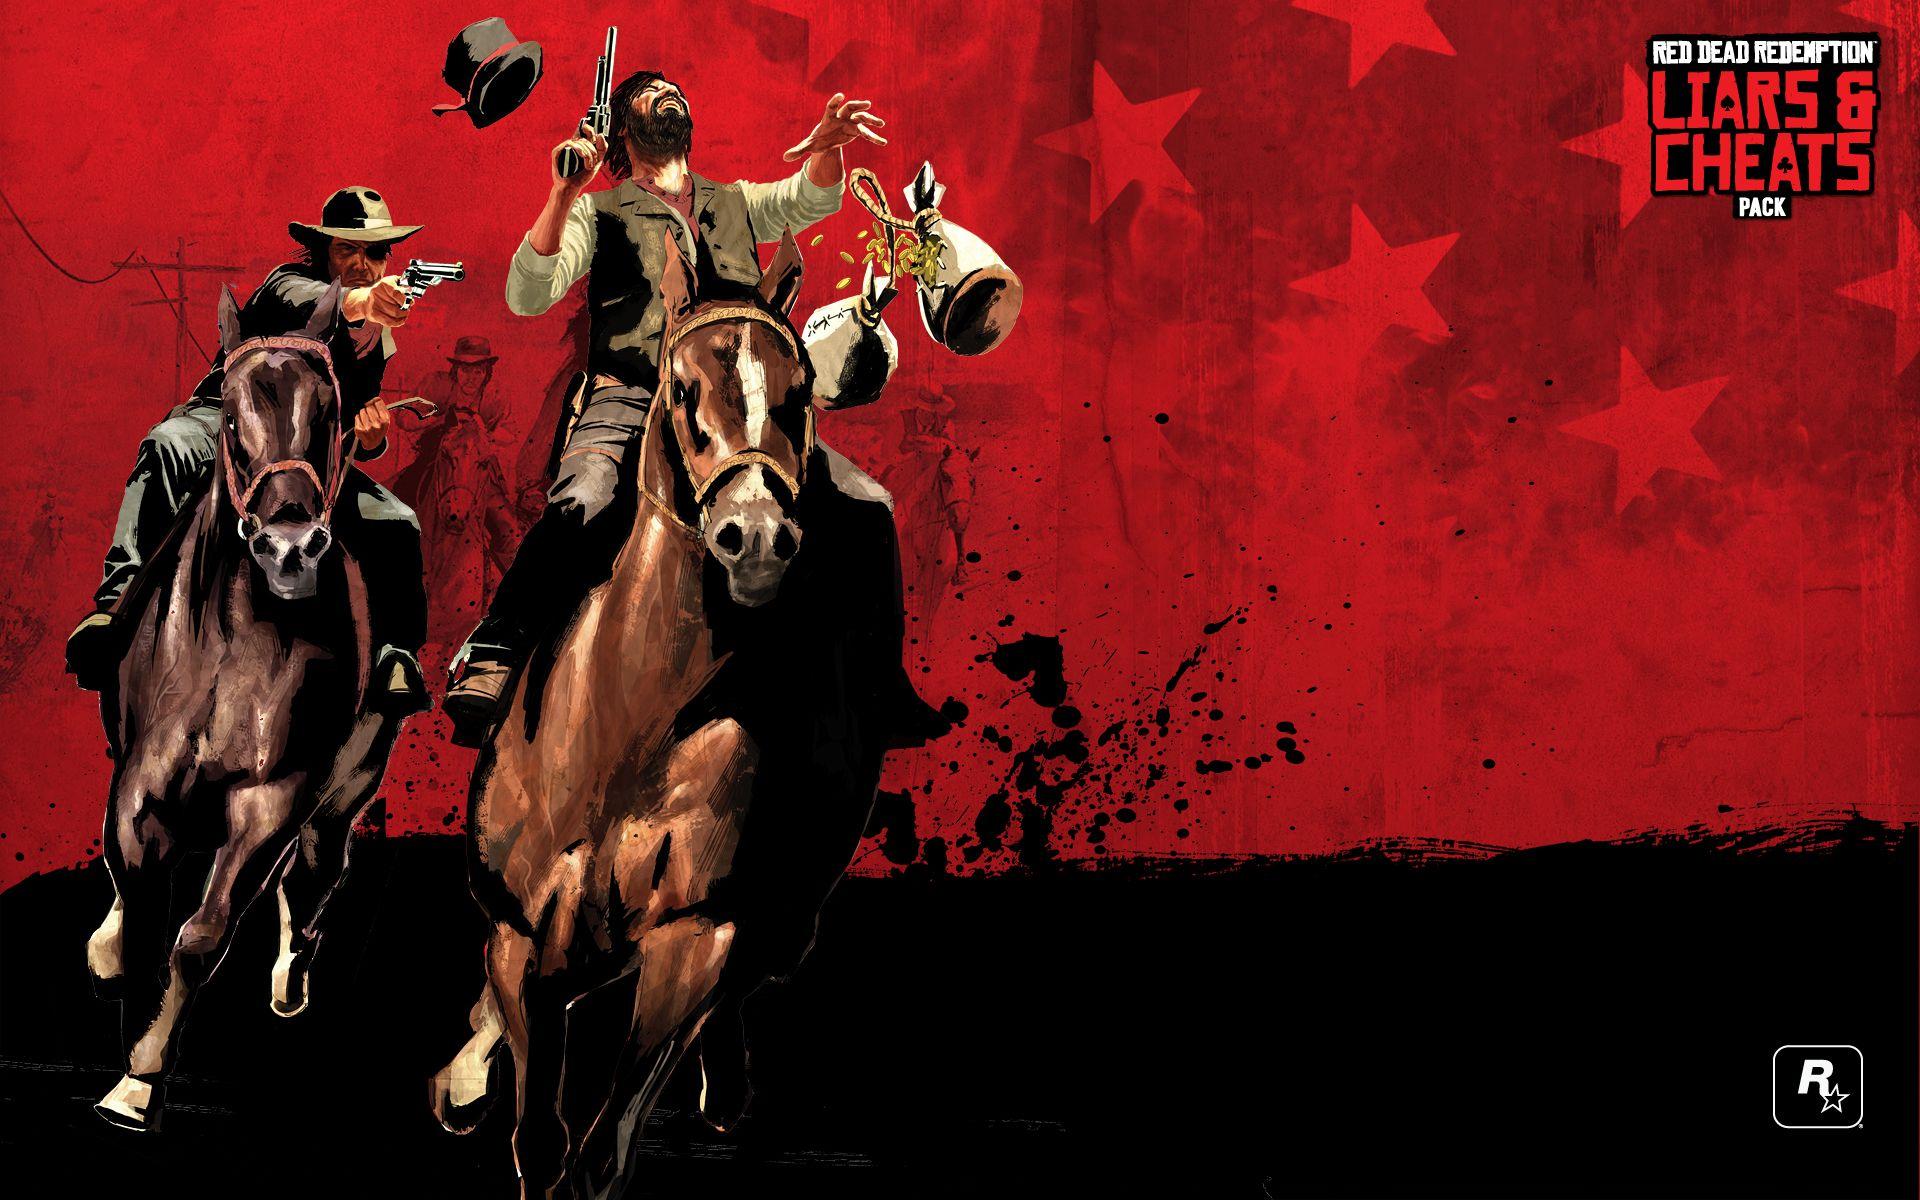 red dead redemption undead nightmare download pc